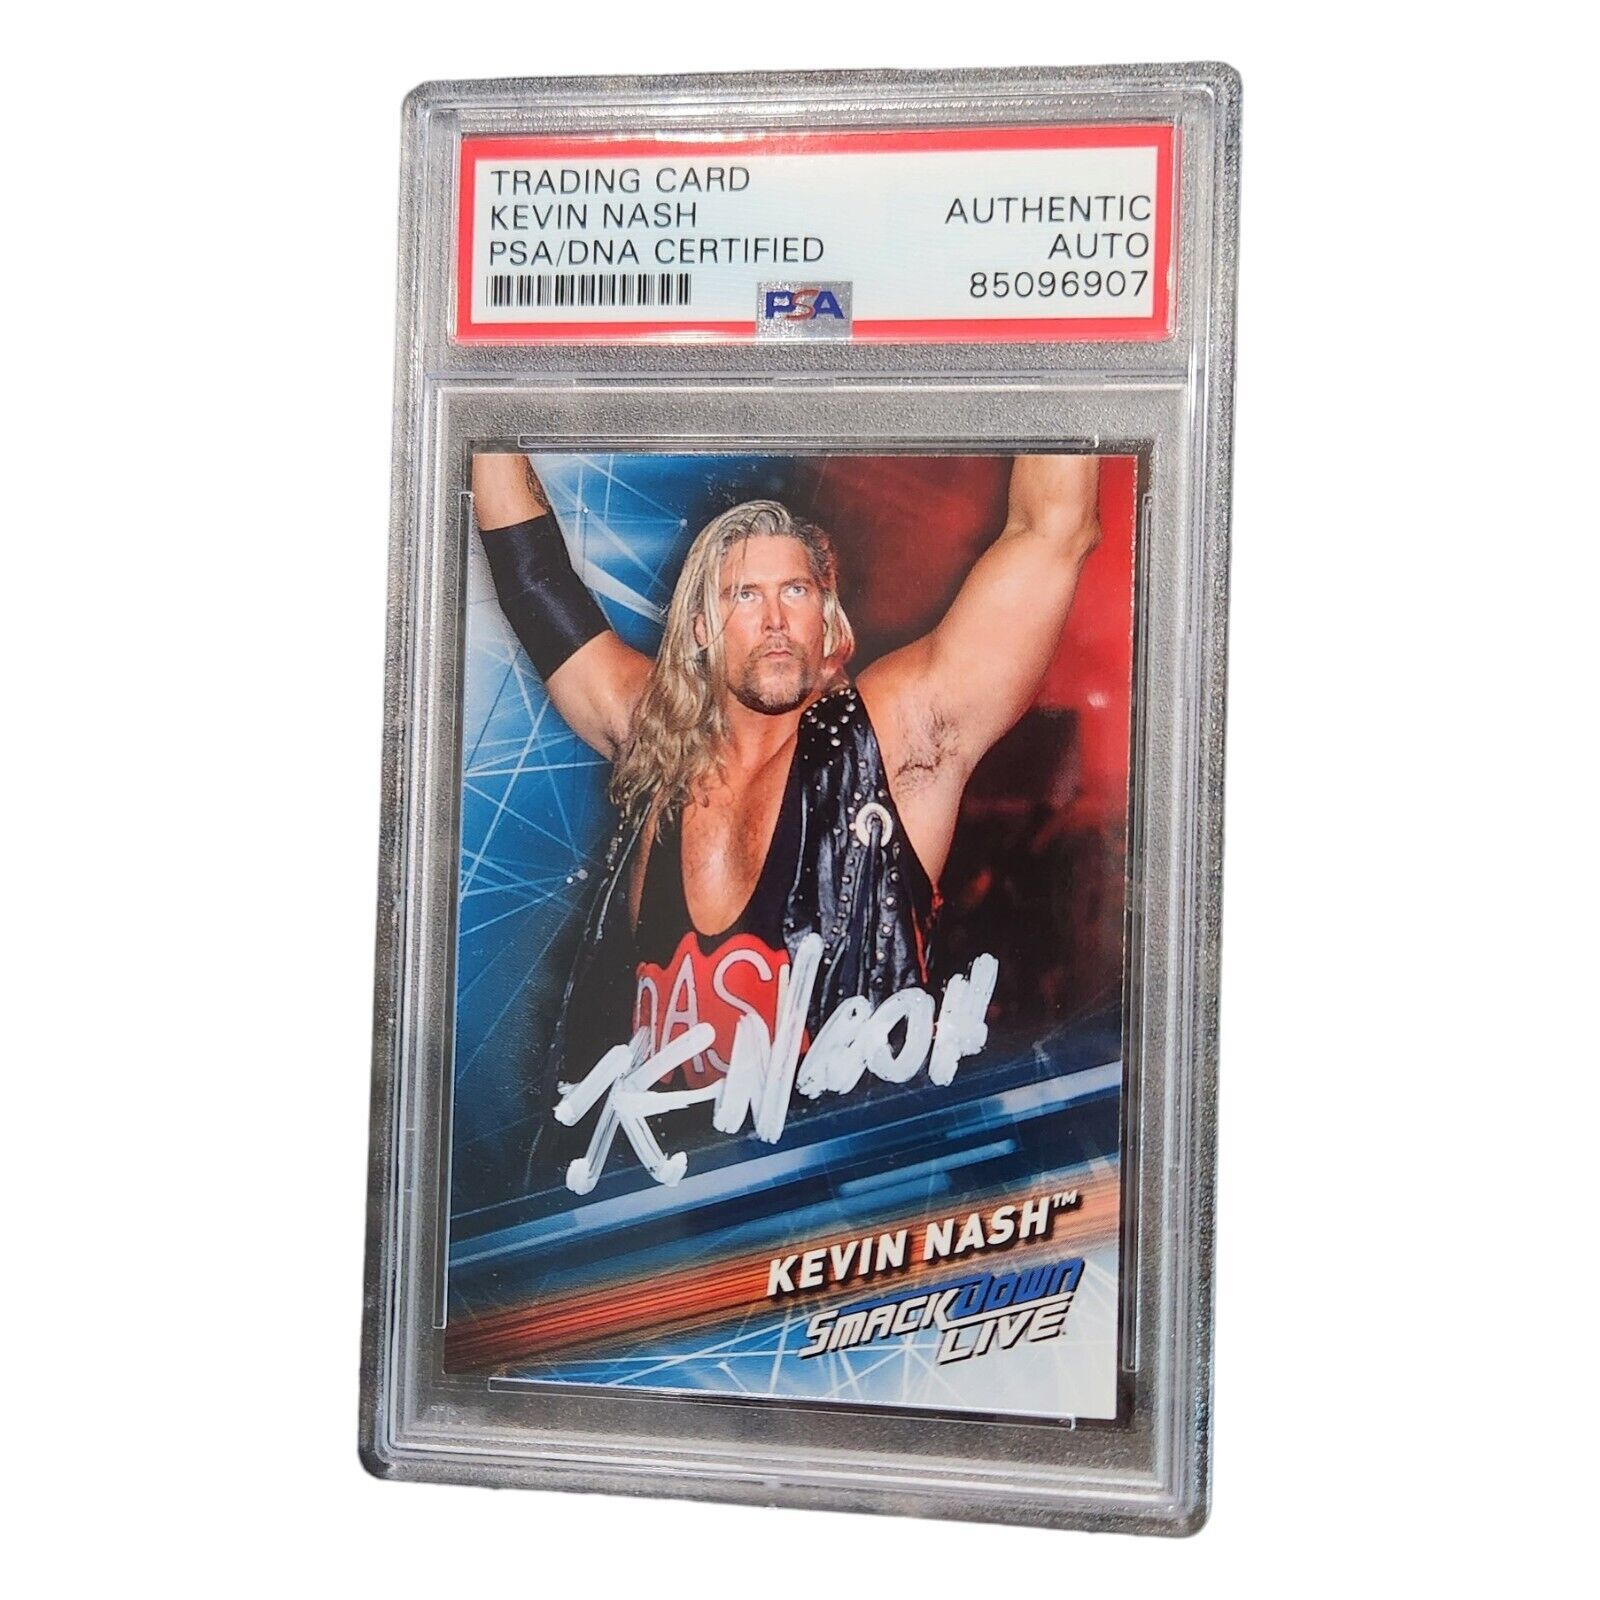 KEVIN NASH SIGNED 2019 WWE TOPPS SMACKDOWN LIVE PSA ENCAPSULATED WCW DIESEL NWO